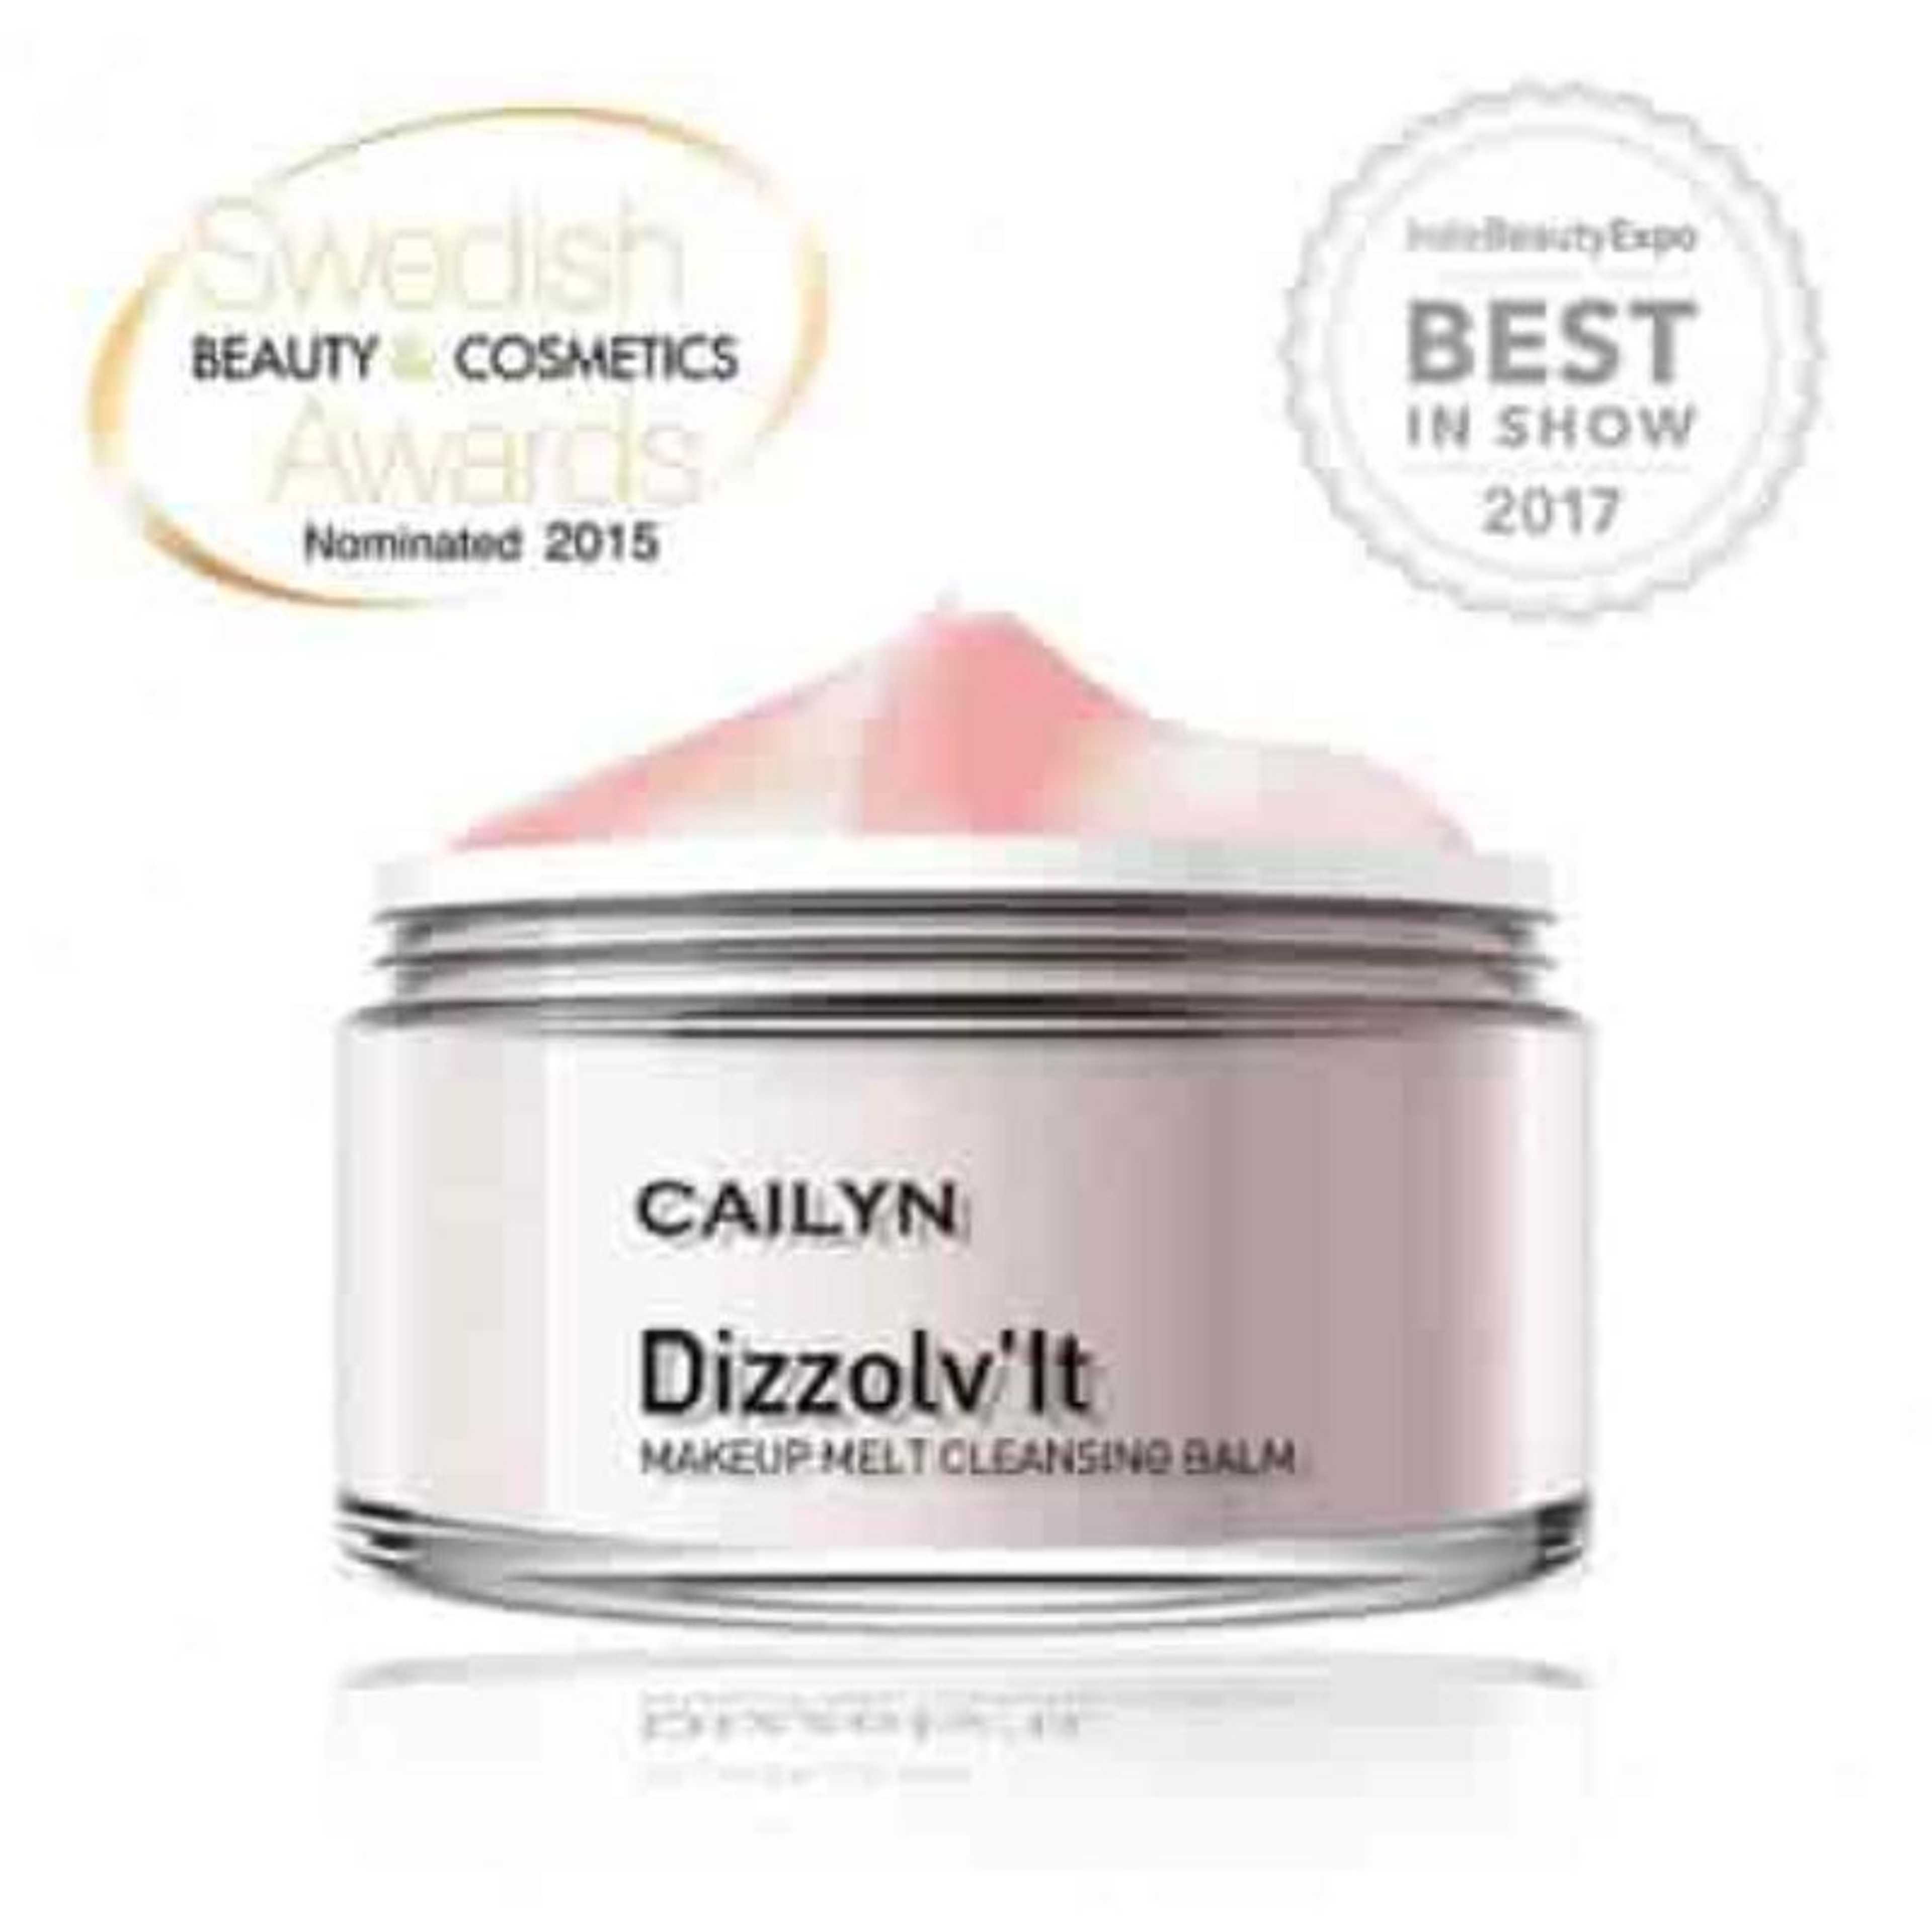 CAILYN DIZZOLV’IT MAKEUP MELT CLEANSING BALM 50g